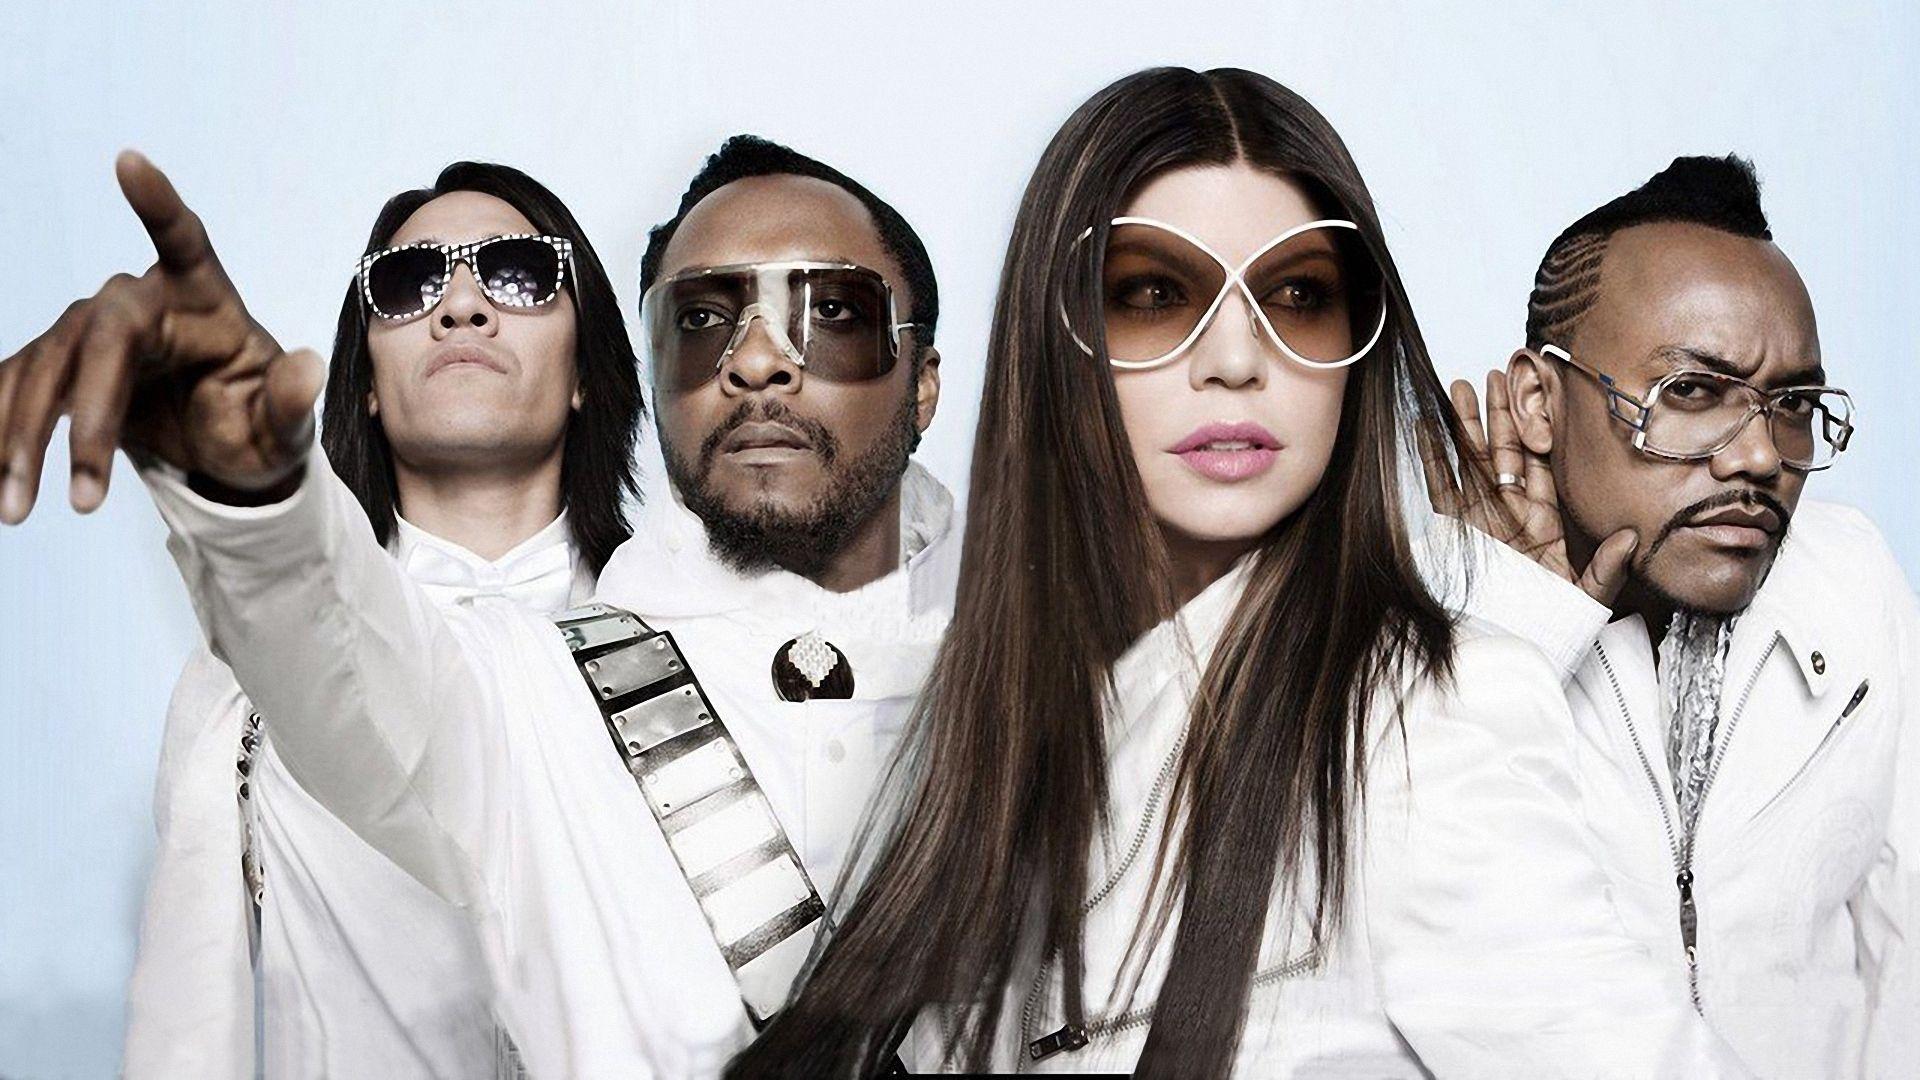 Download wallpaper 1920x1080 the black eyed peas, glasses, image